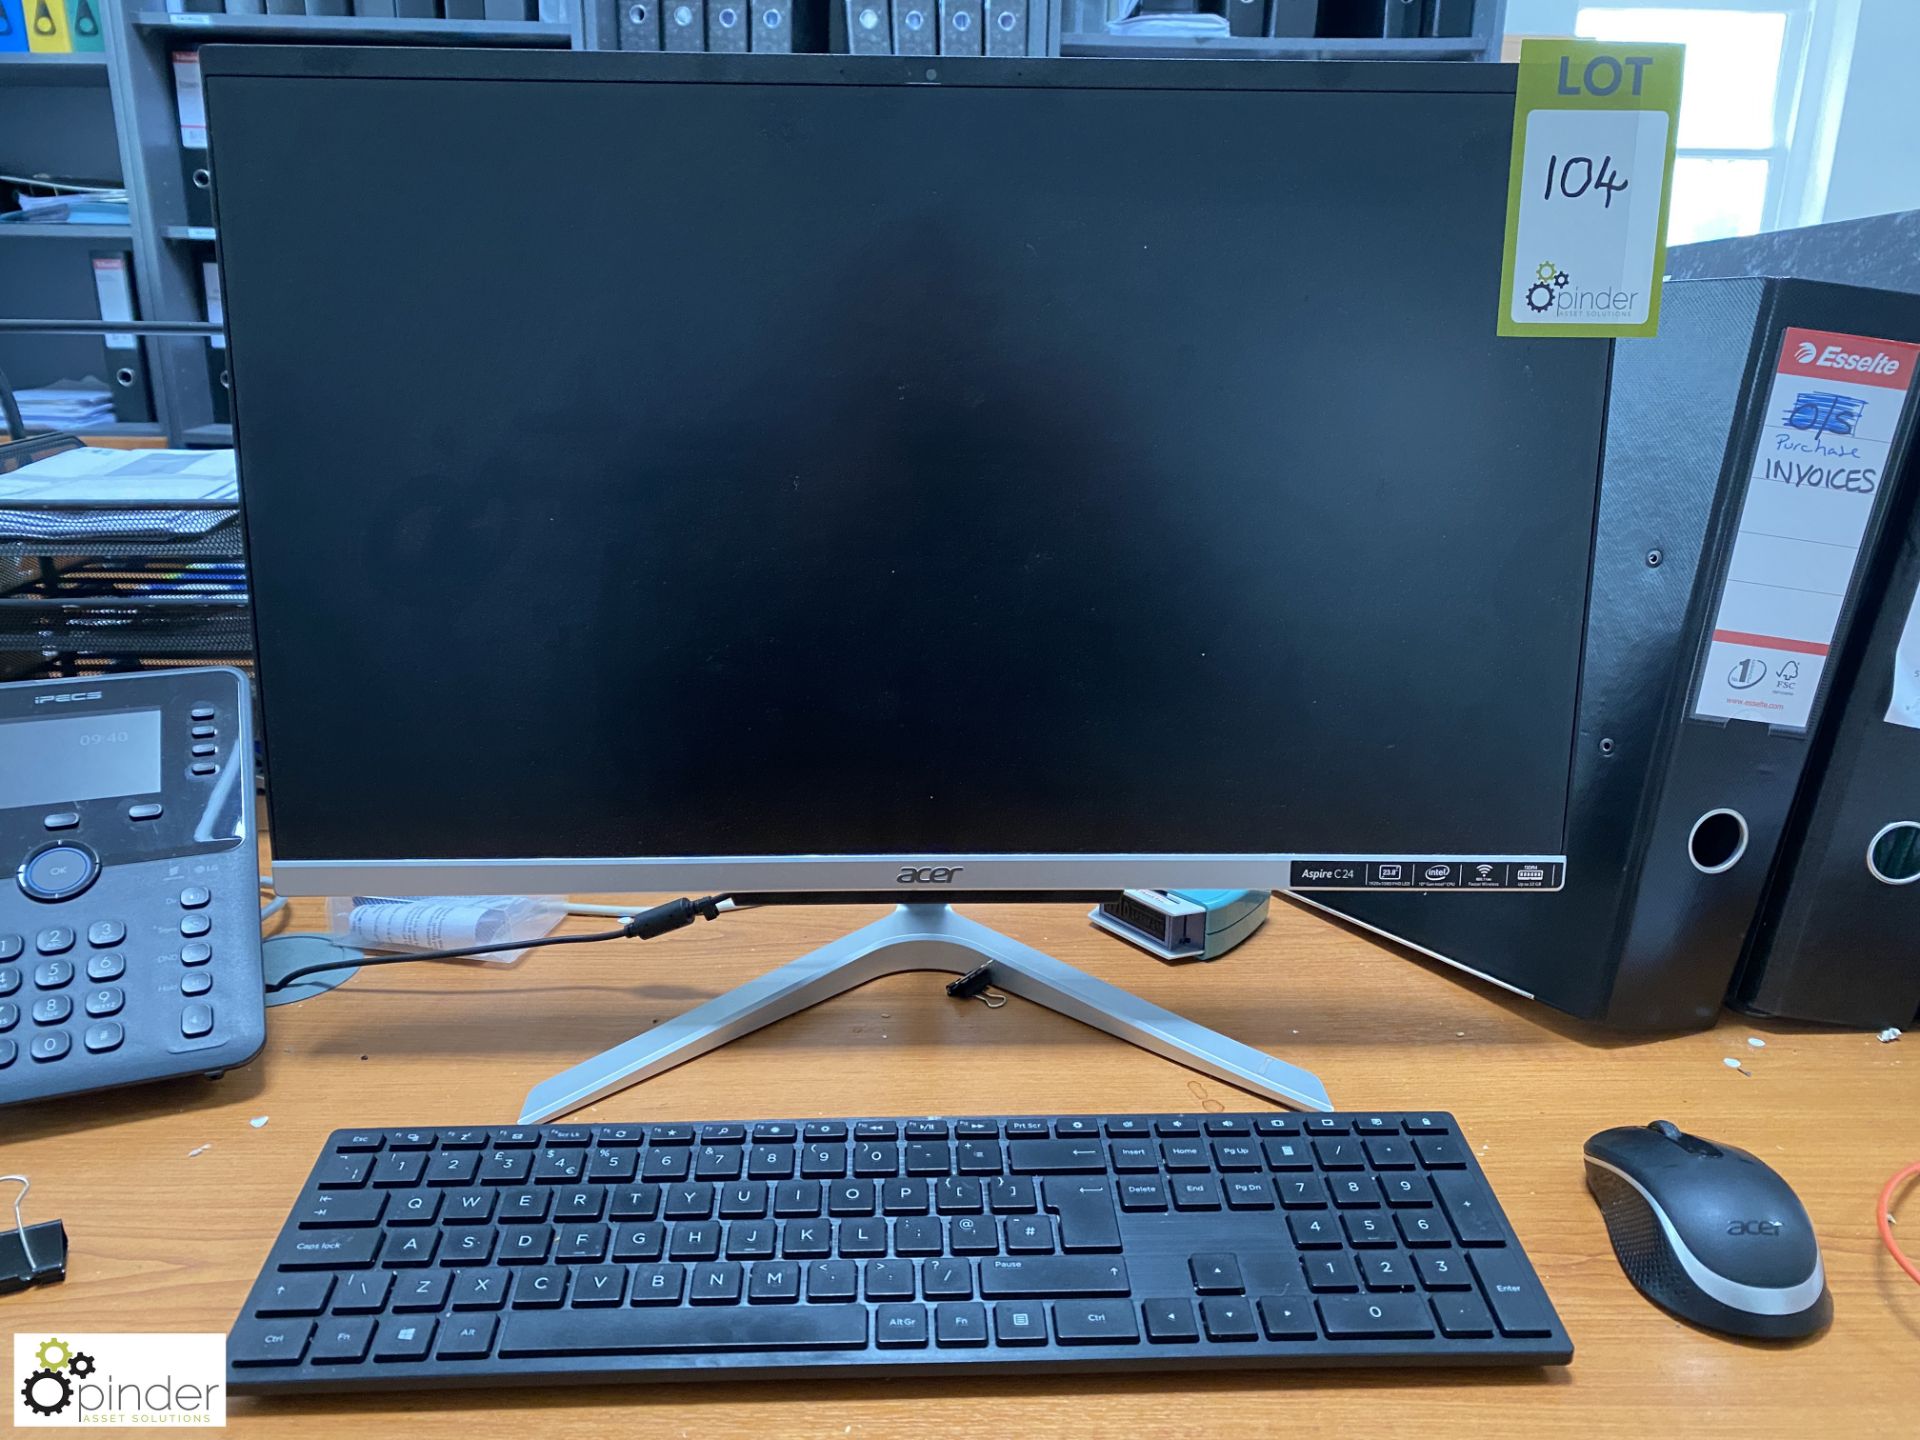 Acer Aspire C24 All In One Desktop PC, with wireless keyboard and mouse (LOCATION: Devon)